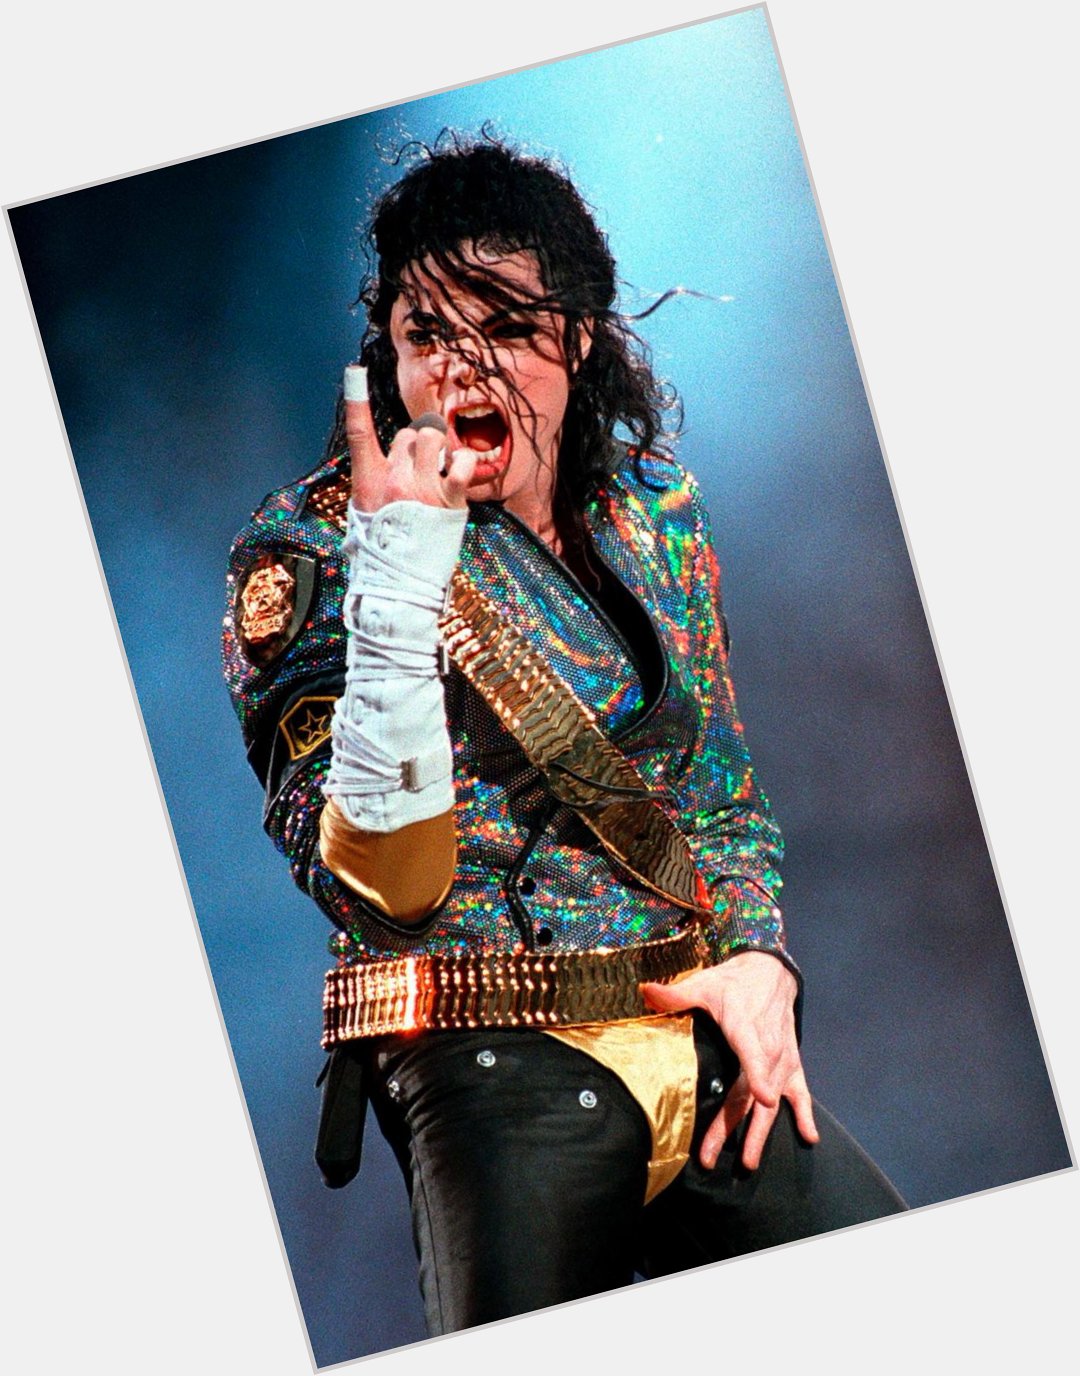 Happy birthday to THE GREATEST artist of all time. There will never be another Michael Jackson. 